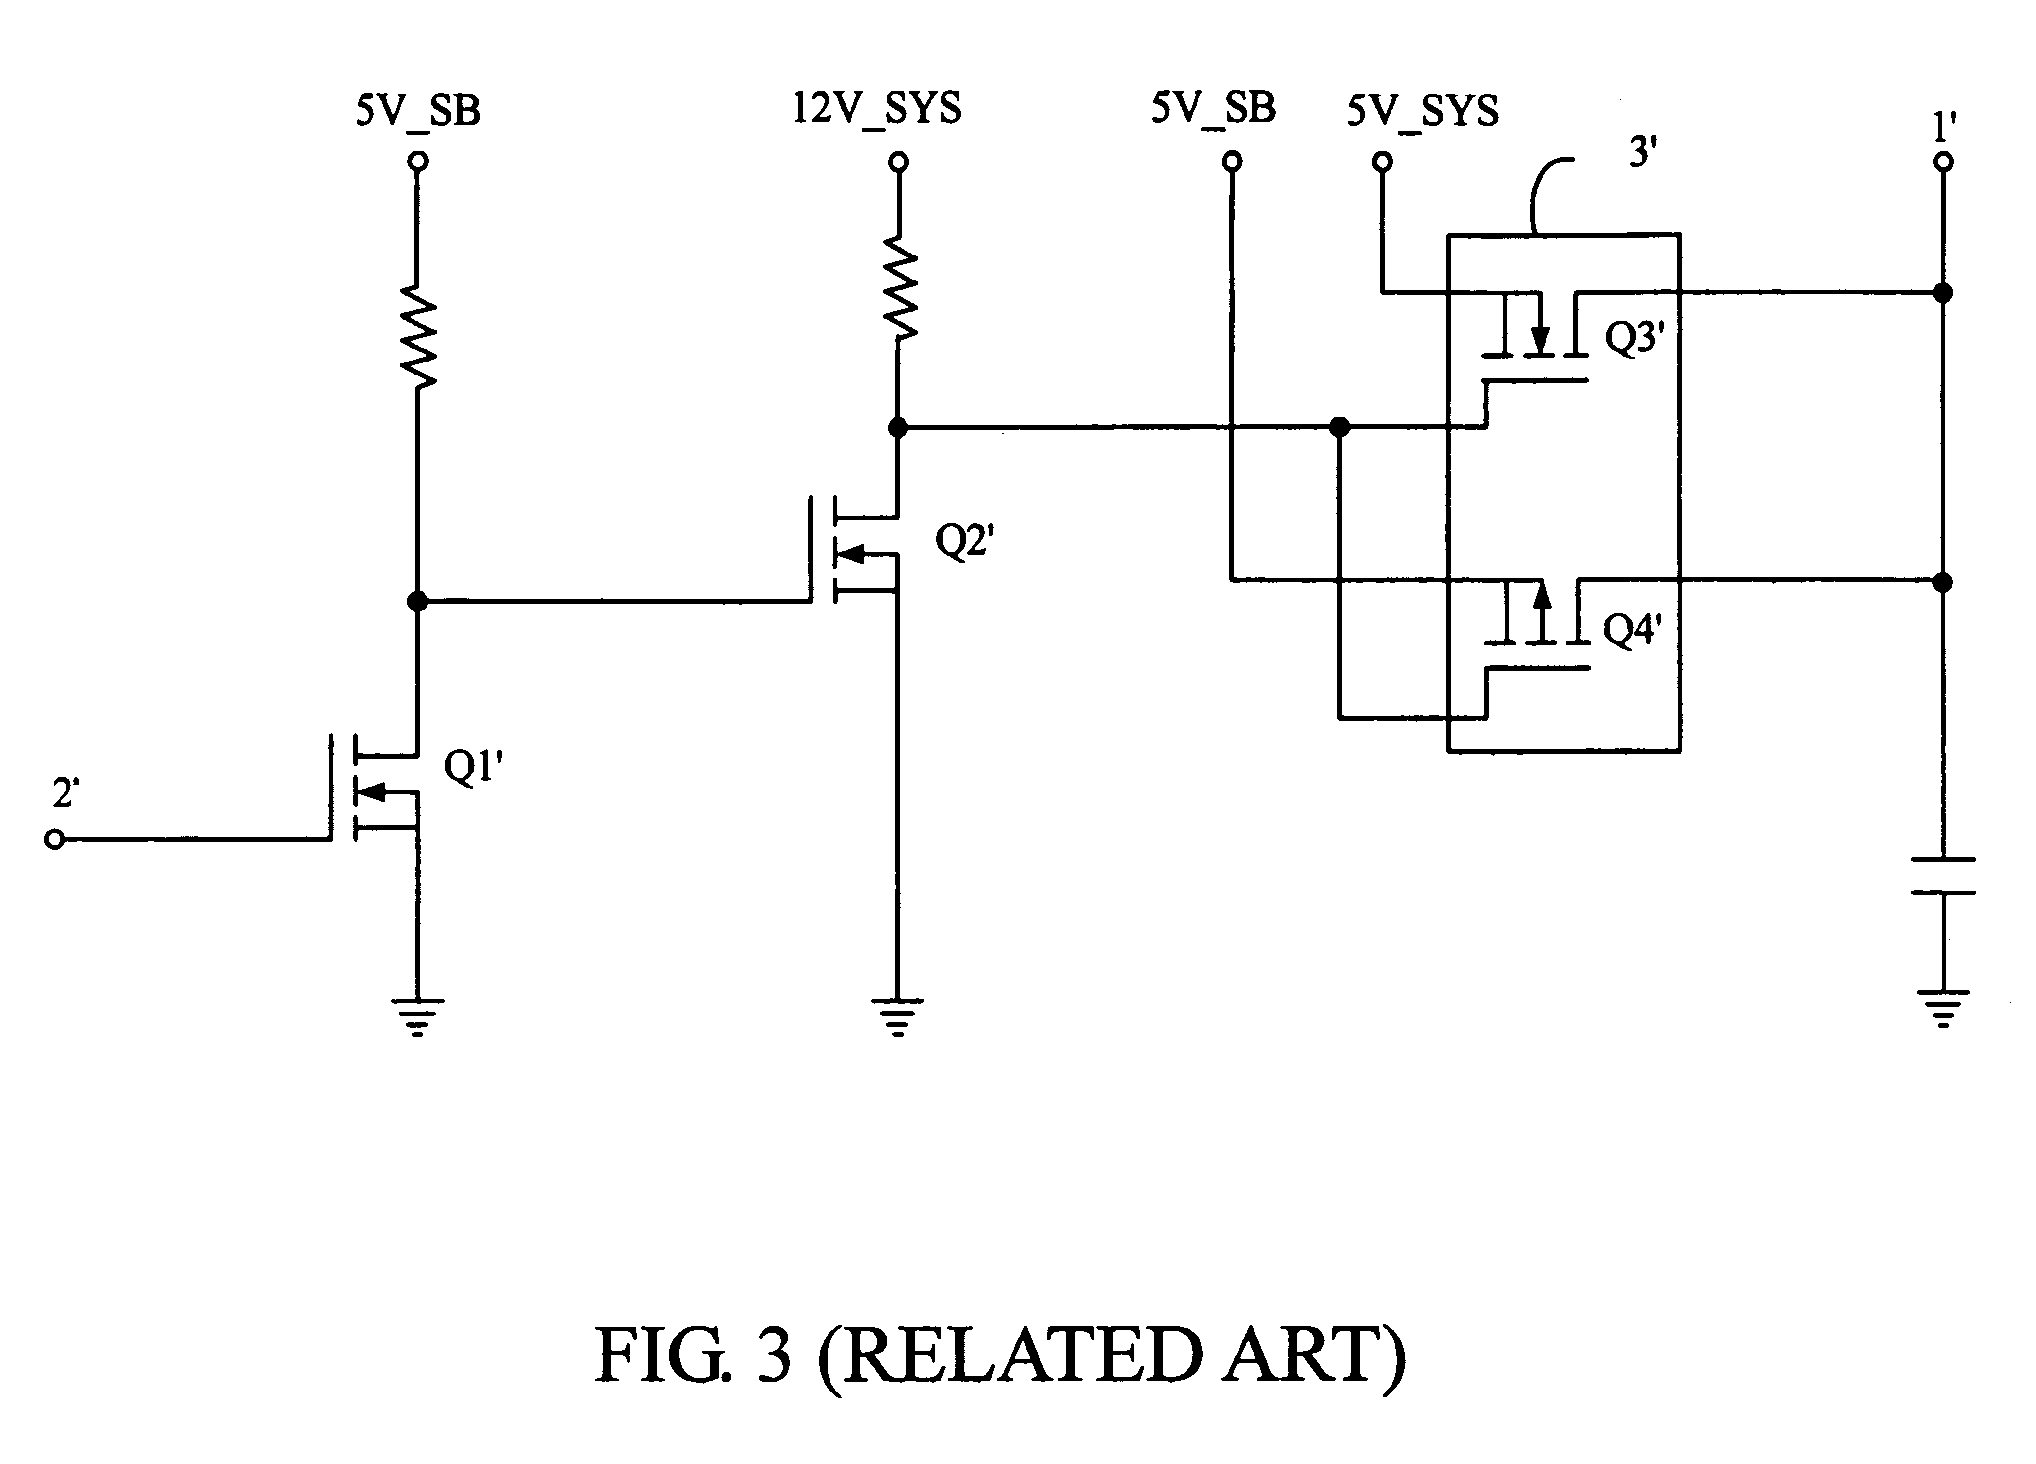 Supply voltage switching circuit